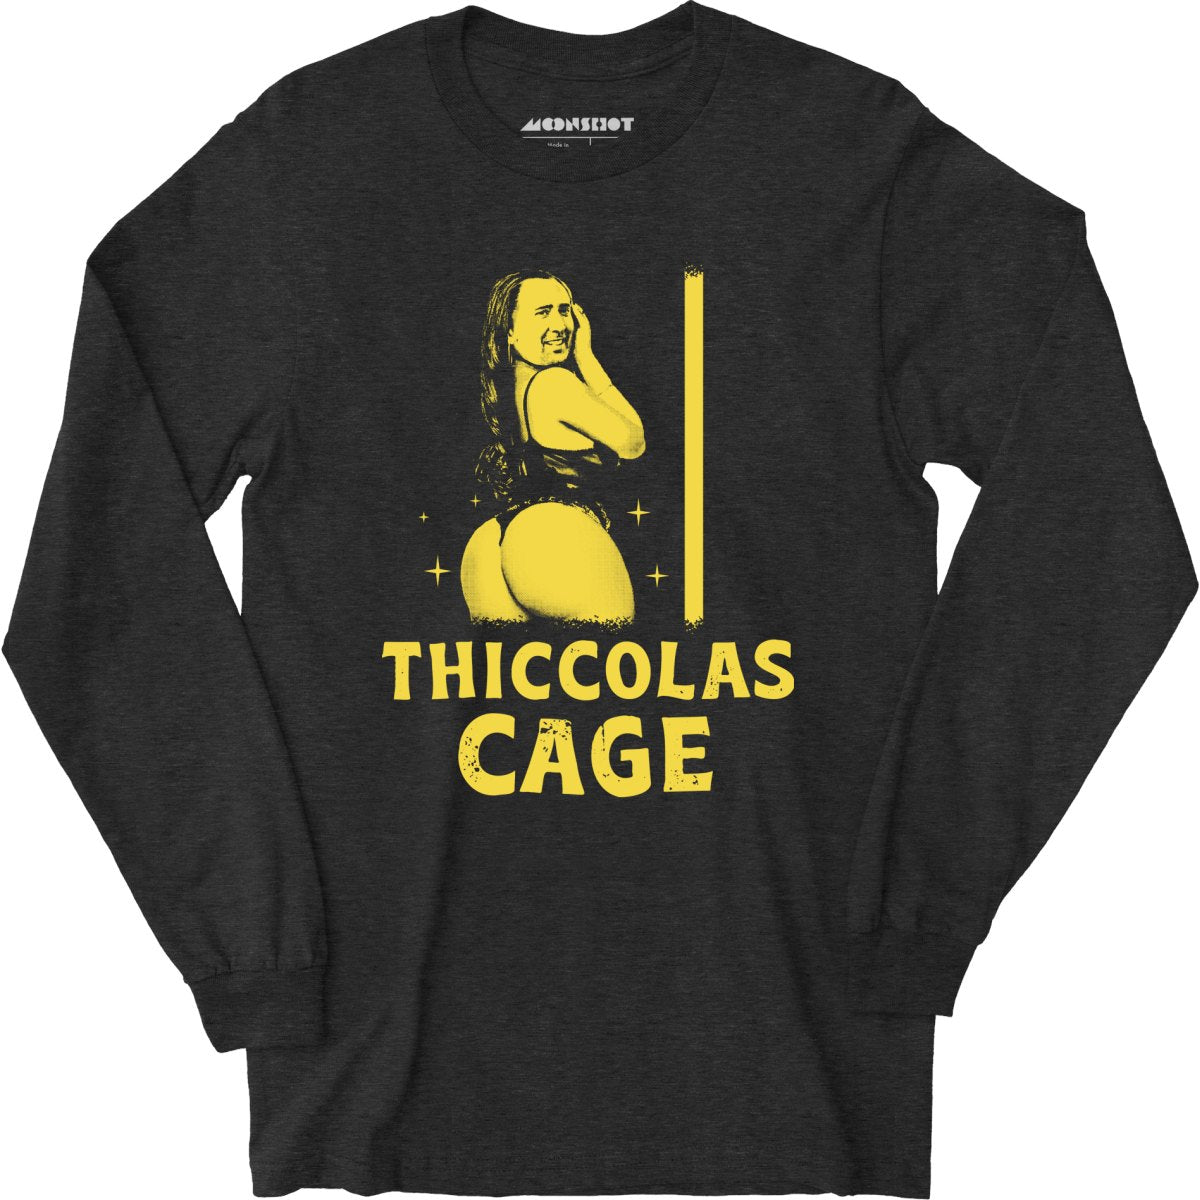 Thiccolas Cage - Long Sleeve T-Shirt